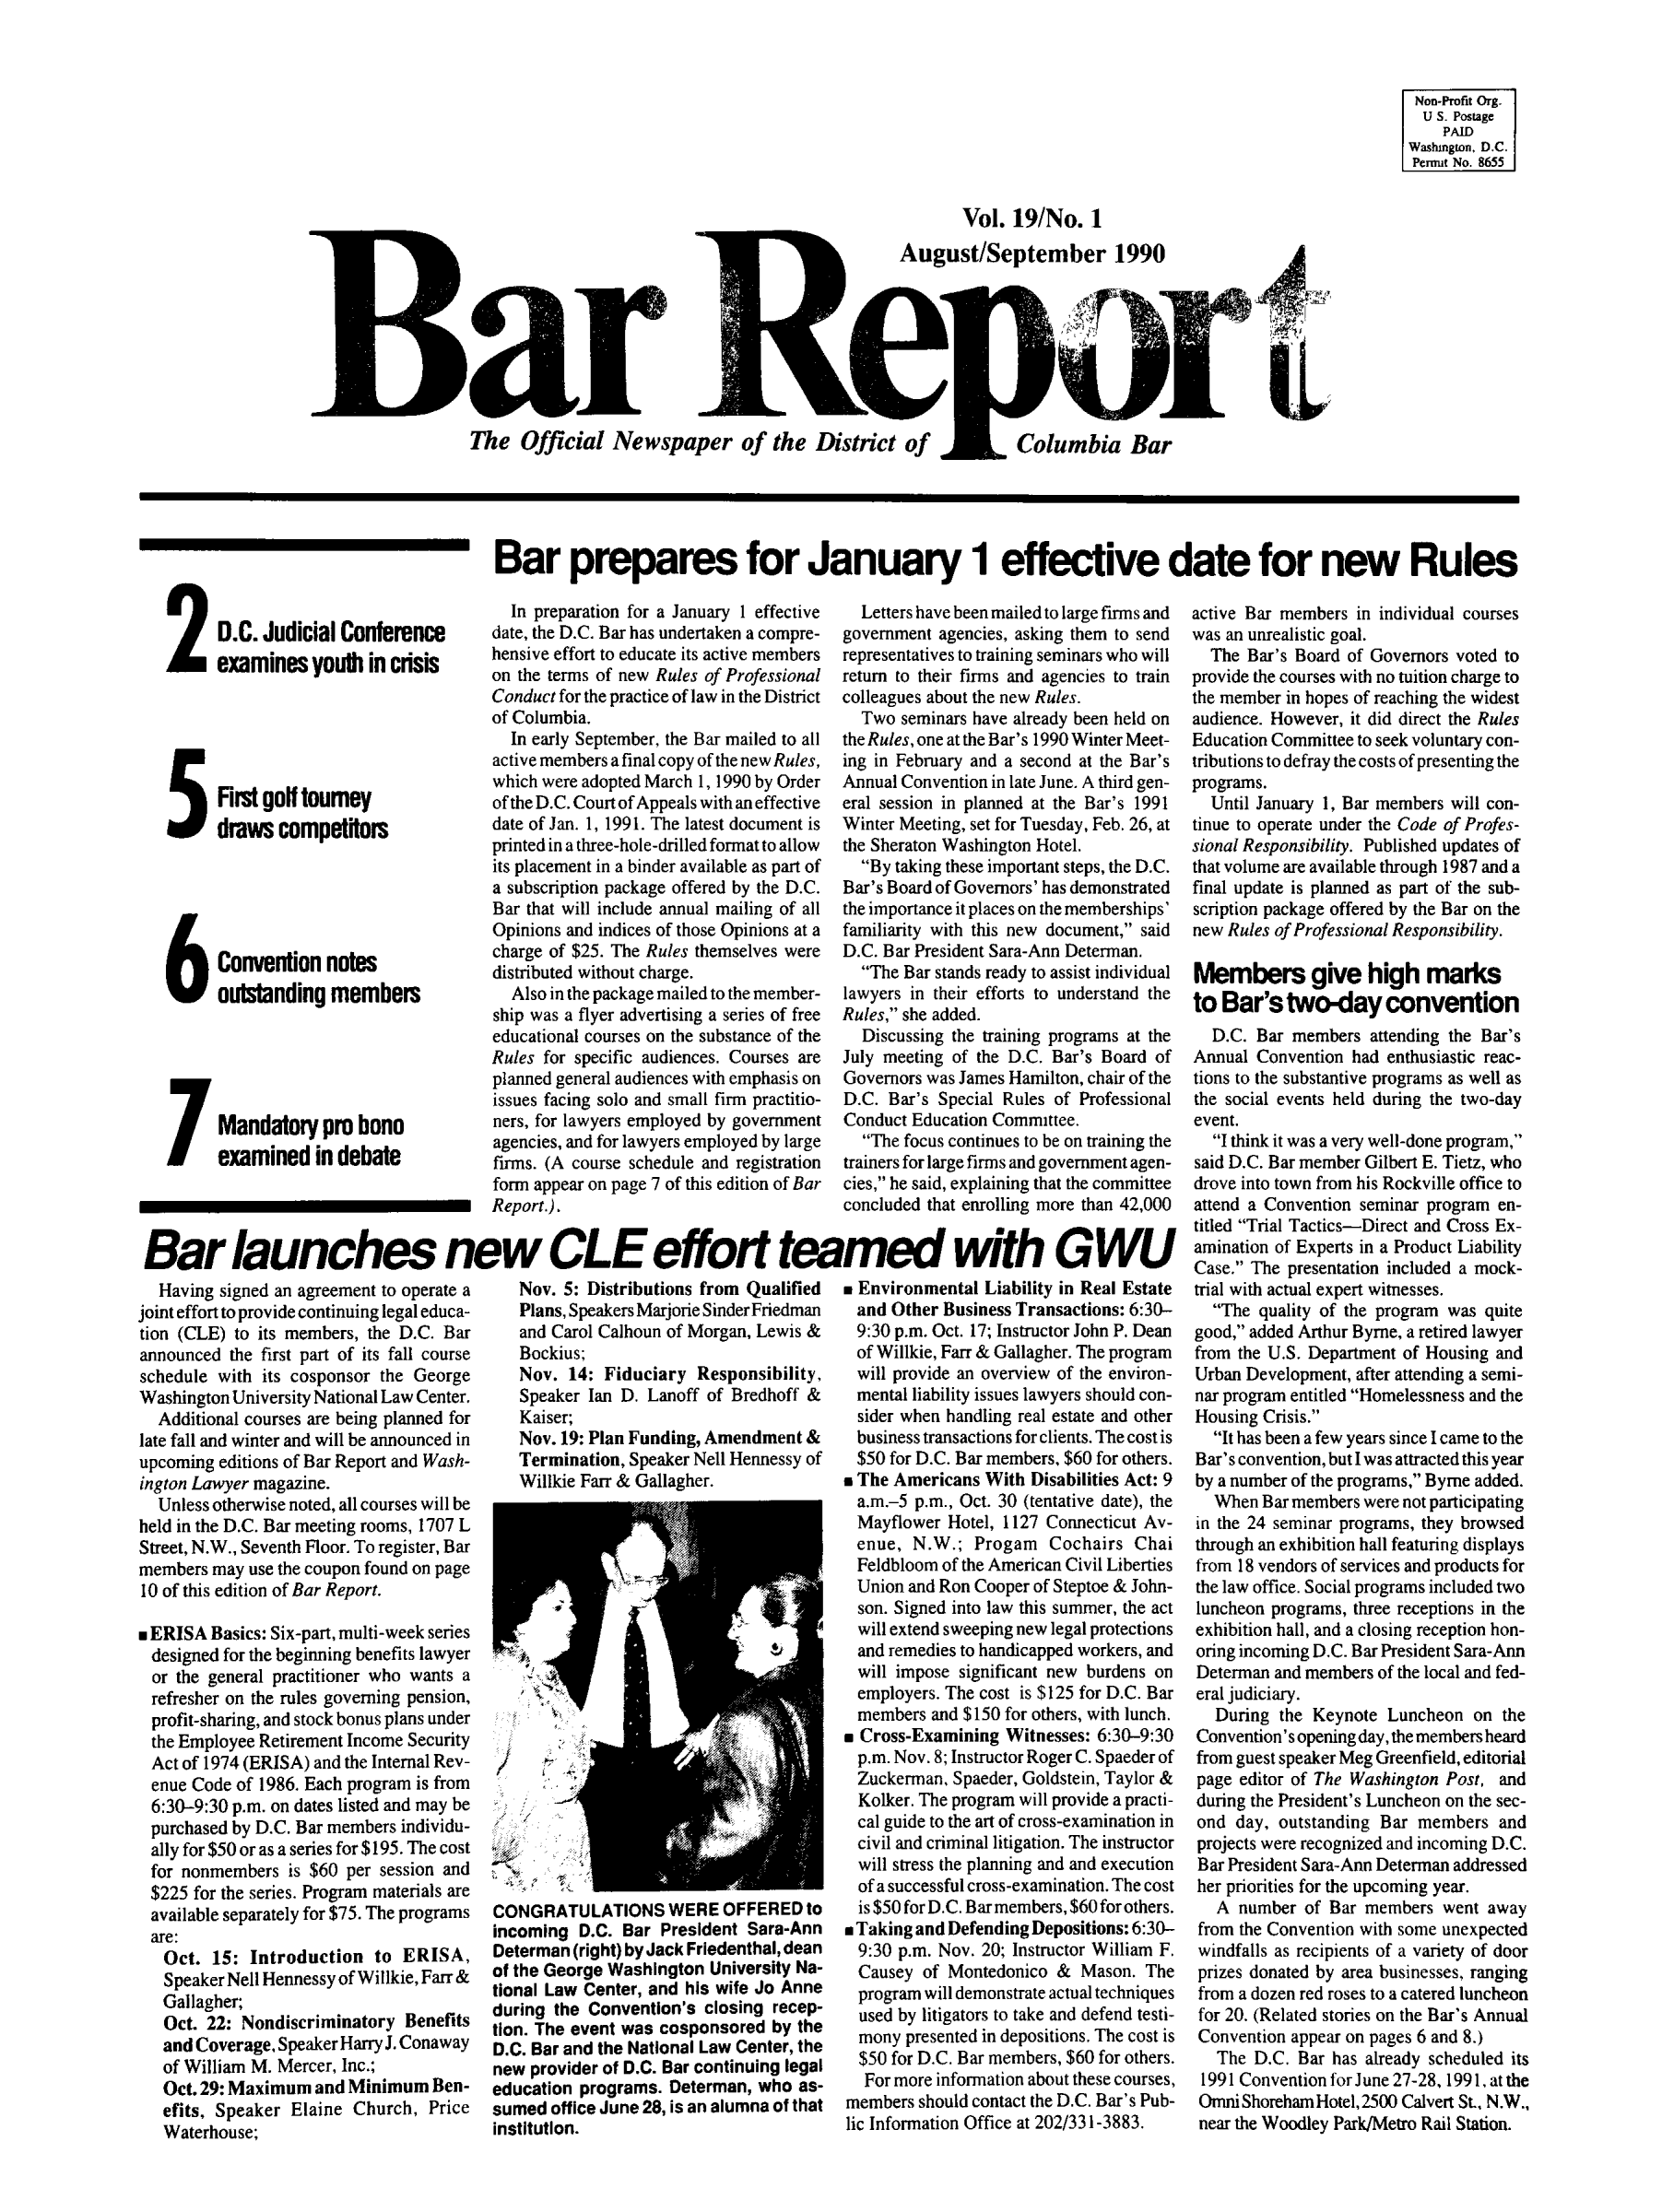 handle is hein.barjournals/breport0021 and id is 1 raw text is: Non-Profit Org.
U S. Postage
PAID
Washington, D.C
Pernut No. 8655

Vol. 19/No. 1
August/September 1990
The Official Newspaper of the District of  Columbia Bar

Bar prepares for January 1 effective date for new Rules

2 D.C. Judicial Conference
examines youth in crisis
First golf tourney
draws competitors
Convenion notes
6o ustanding members
Mandatoryprobono
examined in debate

In preparation for a January 1 effective
date, the D.C. Bar has undertaken a compre-
hensive effort to educate its active members
on the terms of new Rules of Professional
Conduct for the practice of law in the District
of Columbia.
In early September, the Bar mailed to all
active members a final copy of the new Rules,
which were adopted March 1, 1990 by Order
of the D.C. Courtof Appeals withan effective
date of Jan. 1, 1991. The latest document is
printed in a three-hole-drilled format to allow
its placement in a binder available as part of
a subscription package offered by the D.C.
Bar that will include annual mailing of all
Opinions and indices of those Opinions at a
charge of $25. The Rules themselves were
distributed without charge.
Also in the package mailed to the member-
ship was a flyer advertising a series of free
educational courses on the substance of the
Rules for specific audiences. Courses are
planned general audiences with emphasis on
issues facing solo and small firm practitio-
ners, for lawyers employed by government
agencies, and for lawyers employed by large
firms. (A course schedule and registration
form appear on page 7 of this edition of Bar
Report.) .

Letters have been mailed to large firms and
government agencies, asking them to send
representatives to training seminars who will
return to their firms and agencies to train
colleagues about the new Rules.
Two seminars have already been held on
the Rules, one at the Bar's 1990 Winter Meet-
ing in February and a second at the Bar's
Annual Convention in late June. A third gen-
eral session in planned at the Bar's 1991
Winter Meeting, set for Tuesday, Feb. 26, at
the Sheraton Washington Hotel.
By taking these important steps, the D.C.
Bar's Board of Governors' has demonstrated
the importance it places on the memberships'
familiarity with this new document, said
D.C. Bar President Sara-Ann Determan.
The Bar stands ready to assist individual
lawyers in their efforts to understand the
Rules, she added.
Discussing the training programs at the
July meeting of the D.C. Bar's Board of
Governors was James Hamilton, chair of the
D.C. Bar's Special Rules of Professional
Conduct Education Committee.
The focus continues to be on training the
trainers for large firms and government agen-
cies, he said, explaining that the committee
concluded that enrolling more than 42,000

Bar launches new CLE effort teamed with GWU

Having signed an agreement to operate a
joint effort to provide continuing legal educa-
tion (CLE) to its members, the D.C. Bar
announced the first part of its fall course
schedule with its cosponsor the George
Washington University National Law Center.
Additional courses are being planned for
late fall and winter and will be announced in
upcoming editions of Bar Report and Wash-
ington Lawyer magazine.
Unless otherwise noted, all courses will be
held in the D.C. Bar meeting rooms, 1707 L
Street, N.W., Seventh Floor. To register, Bar
members may use the coupon found on page
10 of this edition of Bar Report.
n ERISA Basics: Six-part, multi-week series
designed for the beginning benefits lawyer
or the general practitioner who wants a
refresher on the rules governing pension,
profit-sharing, and stock bonus plans under
the Employee Retirement Income Security
Act of 1974 (ERISA) and the Internal Rev-
enue Code of 1986. Each program is from
6:30-9:30 p.m. on dates listed and may be
purchased by D.C. Bar members individu-
ally for $50 or as a series for $195. The cost
for nonmembers is $60 per session and
$225 for the series. Program materials are
available separately for $75. The programs
are:
Oct. 15: Introduction to ERISA,
Speaker Nell Hennessy of Willkie, Farr &
Gallagher;
Oct. 22: Nondiscriminatory Benefits
and Coverage, Speaker Harry J. Conaway
of William M. Mercer, Inc.;
Oct.29: Maximum and Minimum Ben-
efits, Speaker Elaine Church, Price
Waterhouse;

Nov. 5: Distributions from Qualified
Plans, Speakers Marjorie Sinder Friedman
and Carol Calhoun of Morgan, Lewis &
Bockius;
Nov. 14: Fiduciary Responsibility,
Speaker Ian D. Lanoff of Bredhoff &
Kaiser;
Nov. 19: Plan Funding, Amendment &
Termination, Speaker Nell Hennessy of
Willkie Farr & Gallagher.

CONGRATULATIONS WERE OFFERED to
incoming D.C. Bar President Sara-Ann
Determan (right) by Jack Friedenthal,dean
of the George Washington University Na-
tional Law Center, and his wife Jo Anne
during the Convention's closing recep-
tion. The event was cosponsored by the
D.C. Bar and the National Law Center, the
new provider of D.C. Bar continuing legal
education programs. Determan, who as-
sumed office June 28, is an alumnaof that
institution.

* Environmental Liability in Real Estate
and Other Business Transactions: 6:30-
9:30 p.m. Oct. 17; Instructor John P. Dean
of Willkie, Farr & Gallagher. The program
will provide an overview of the environ-
mental liability issues lawyers should con-
sider when handling real estate and other
business transactions for clients. The cost is
$50 for D.C. Bar members, $60 for others.
 The Americans With Disabilities Act: 9
a.m.-5 p.m., Oct. 30 (tentative date), the
Mayflower Hotel, 1127 Connecticut Av-
enue, N.W.; Progam Cochairs Chai
Feldbloom of the American Civil Liberties
Union and Ron Cooper of Steptoe & John-
son. Signed into law this summer, the act
will extend sweeping new legal protections
and remedies to handicapped workers, and
will impose significant new burdens on
employers. The cost is $125 for D.C. Bar
members and $150 for others, with lunch.
 Cross-Examining Witnesses: 6:30-9:30
p.m. Nov. 8; Instructor Roger C. Spaeder of
Zuckerman, Spaeder, Goldstein, Taylor &
Kolker. The program will provide a practi-
cal guide to the art of cross-examination in
civil and criminal litigation. The instructor
will stress the planning and and execution
of a successful cross-examination. The cost
is $50 for D.C. Barmembers, $60 forothers.
 Taking and Defending Depositions: 6:30-
9:30 p.m. Nov. 20; Instructor William F.
Causey of Montedonico & Mason. The
program will demonstrate actual techniques
used by litigators to take and defend testi-
mony presented in depositions. The cost is
$50 for D.C. Bar members, $60 for others.
For more information about these courses,
members should contact the D.C. Bar's Pub-
lic Information Office at 202/331-3883.

active Bar members in individual courses
was an unrealistic goal.
The Bar's Board of Governors voted to
provide the courses with no tuition charge to
the member in hopes of reaching the widest
audience. However, it did direct the Rules
Education Committee to seek voluntary con-
tributions to defray the costs of presenting the
programs.
Until January 1, Bar members will con-
tinue to operate under the Code of Profes-
sional Responsibility. Published updates of
that volume are available through 1987 and a
final update is planned as part of the sub-
scription package offered by the Bar on the
new Rules of Professional Responsibility.
Members give high marks
to Bar'stwo-day convention
D.C. Bar members attending the Bar's
Annual Convention had enthusiastic reac-
tions to the substantive programs as well as
the social events held during the two-day
event.
I think it was a very well-done program,
said D.C. Bar member Gilbert E. Tietz, who
drove into town from his Rockville office to
attend a Convention seminar program en-
titled Trial Tactics-Direct and Cross Ex-
amination of Experts in a Product Liability
Case. The presentation included a mock-
trial with actual expert witnesses.
The quality of the program was quite
good, added Arthur Byrne, a retired lawyer
from the U.S. Department of Housing and
Urban Development, after attending a semi-
nar program entitled Homelessness and the
Housing Crisis.
It has been a few years sinceIcame to the
Bar's convention, butI was attracted this year
by a number of the programs, Byrne added.
When Bar members were not participating
in the 24 seminar programs, they browsed
through an exhibition hall featuring displays
from 18 vendors of services and products for
the law office. Social programs included two
luncheon programs, three receptions in the
exhibition hall, and a closing reception hon-
oring incoming D.C. Bar President Sara-Ann
Determan and members of the local and fed-
eral judiciary.
During the Keynote Luncheon on the
Convention's opening day, the members heard
from guest speaker Meg Greenfield, editorial
page editor of The Washington Post, and
during the President's Luncheon on the sec-
ond day, outstanding Bar members and
projects were recognized and incoming D.C.
Bar President Sara-Ann Determan addressed
her priorities for the upcoming year.
A number of Bar members went away
from the Convention with some unexpected
windfalls as recipients of a variety of door
prizes donated by area businesses, ranging
from a dozen red roses to a catered luncheon
for 20. (Related stories on the Bar's Annual
Convention appear on pages 6 and 8.)
The D.C. Bar has already scheduled its
1991 Convention for June 27-28, 1991,.at the
Omni Shoreham Hotel, 2500 Calvert St. N.W.,
near the Woodley Park/Metro Rail Station.


